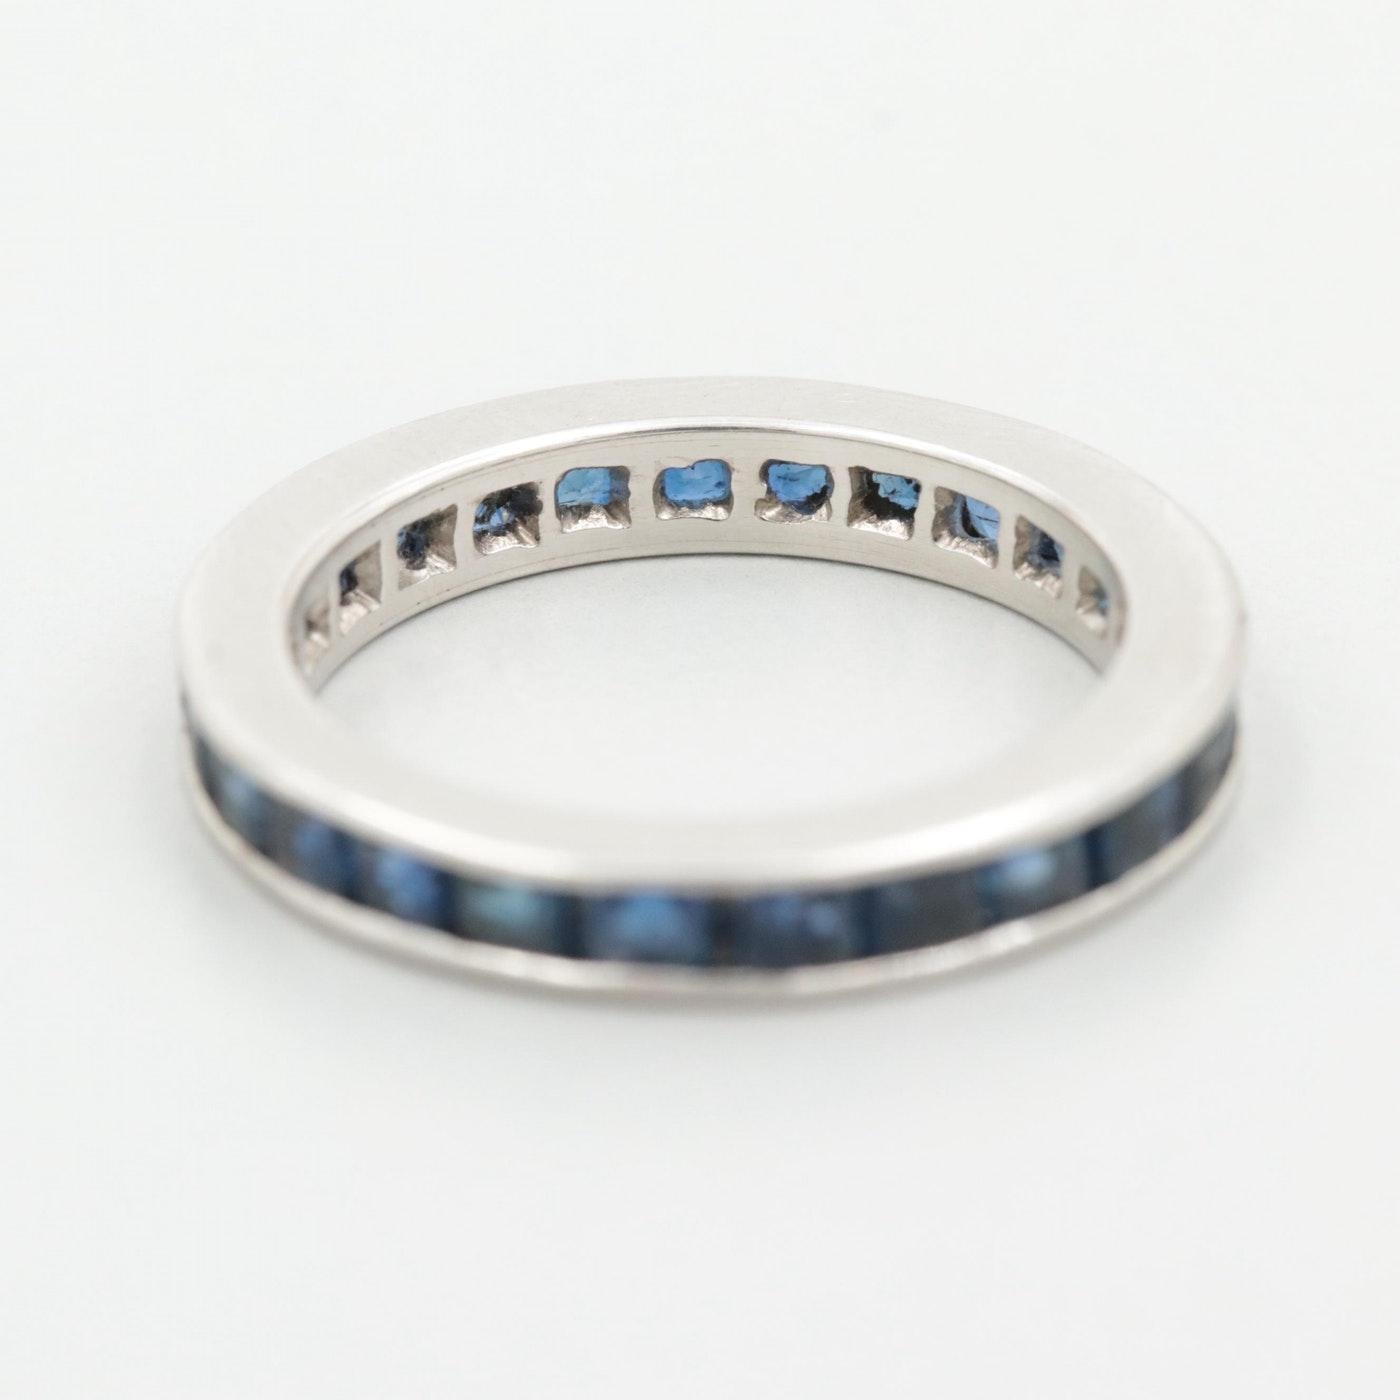 Description: 
This piece is a 1950s Art Deco style Platinum wedding band with 2.2 cttw French Cut natural sapphires! A perfect band with a pop of color with beautiful blue sapphires that will pair with your engagement ring on your special day!!